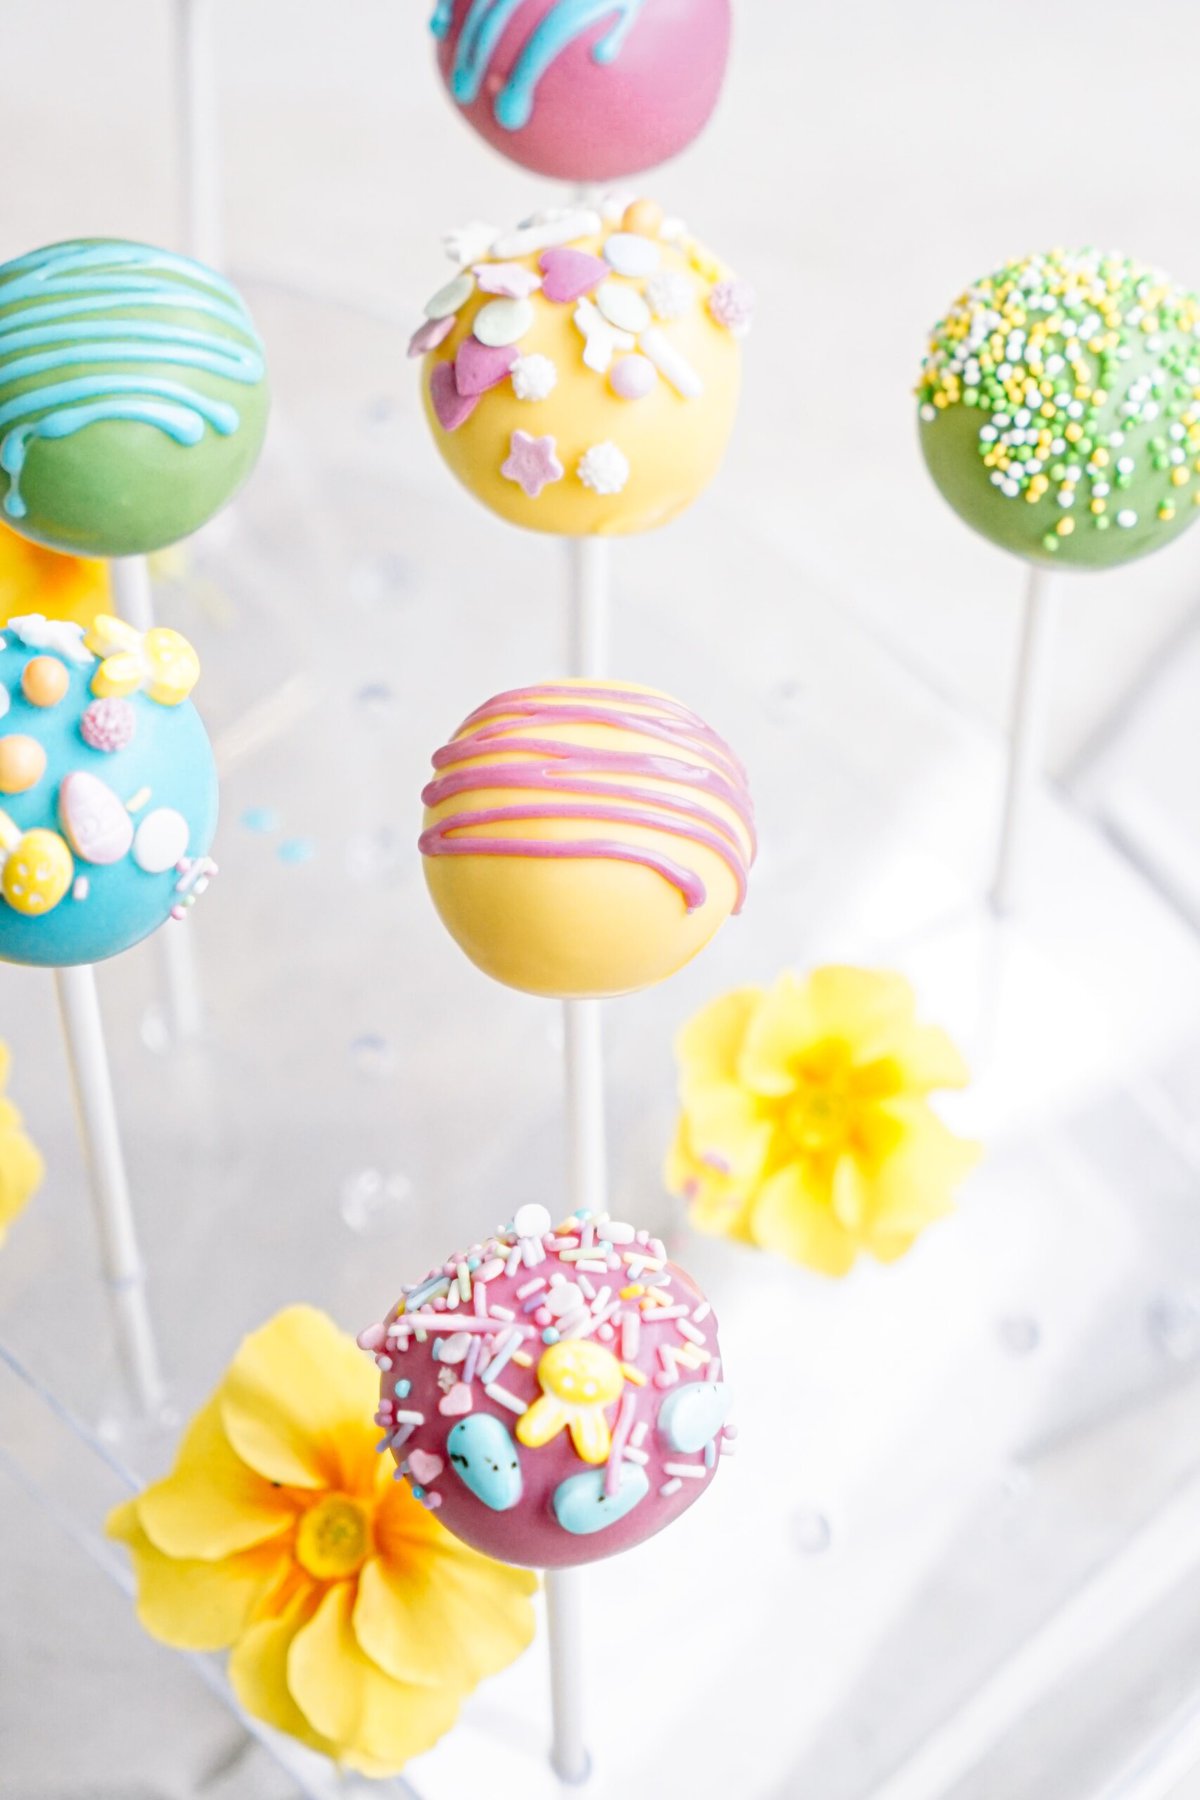 Assorted cake pops adorned with colorful icing and sprinkles displayed on a stand with yellow flowers.